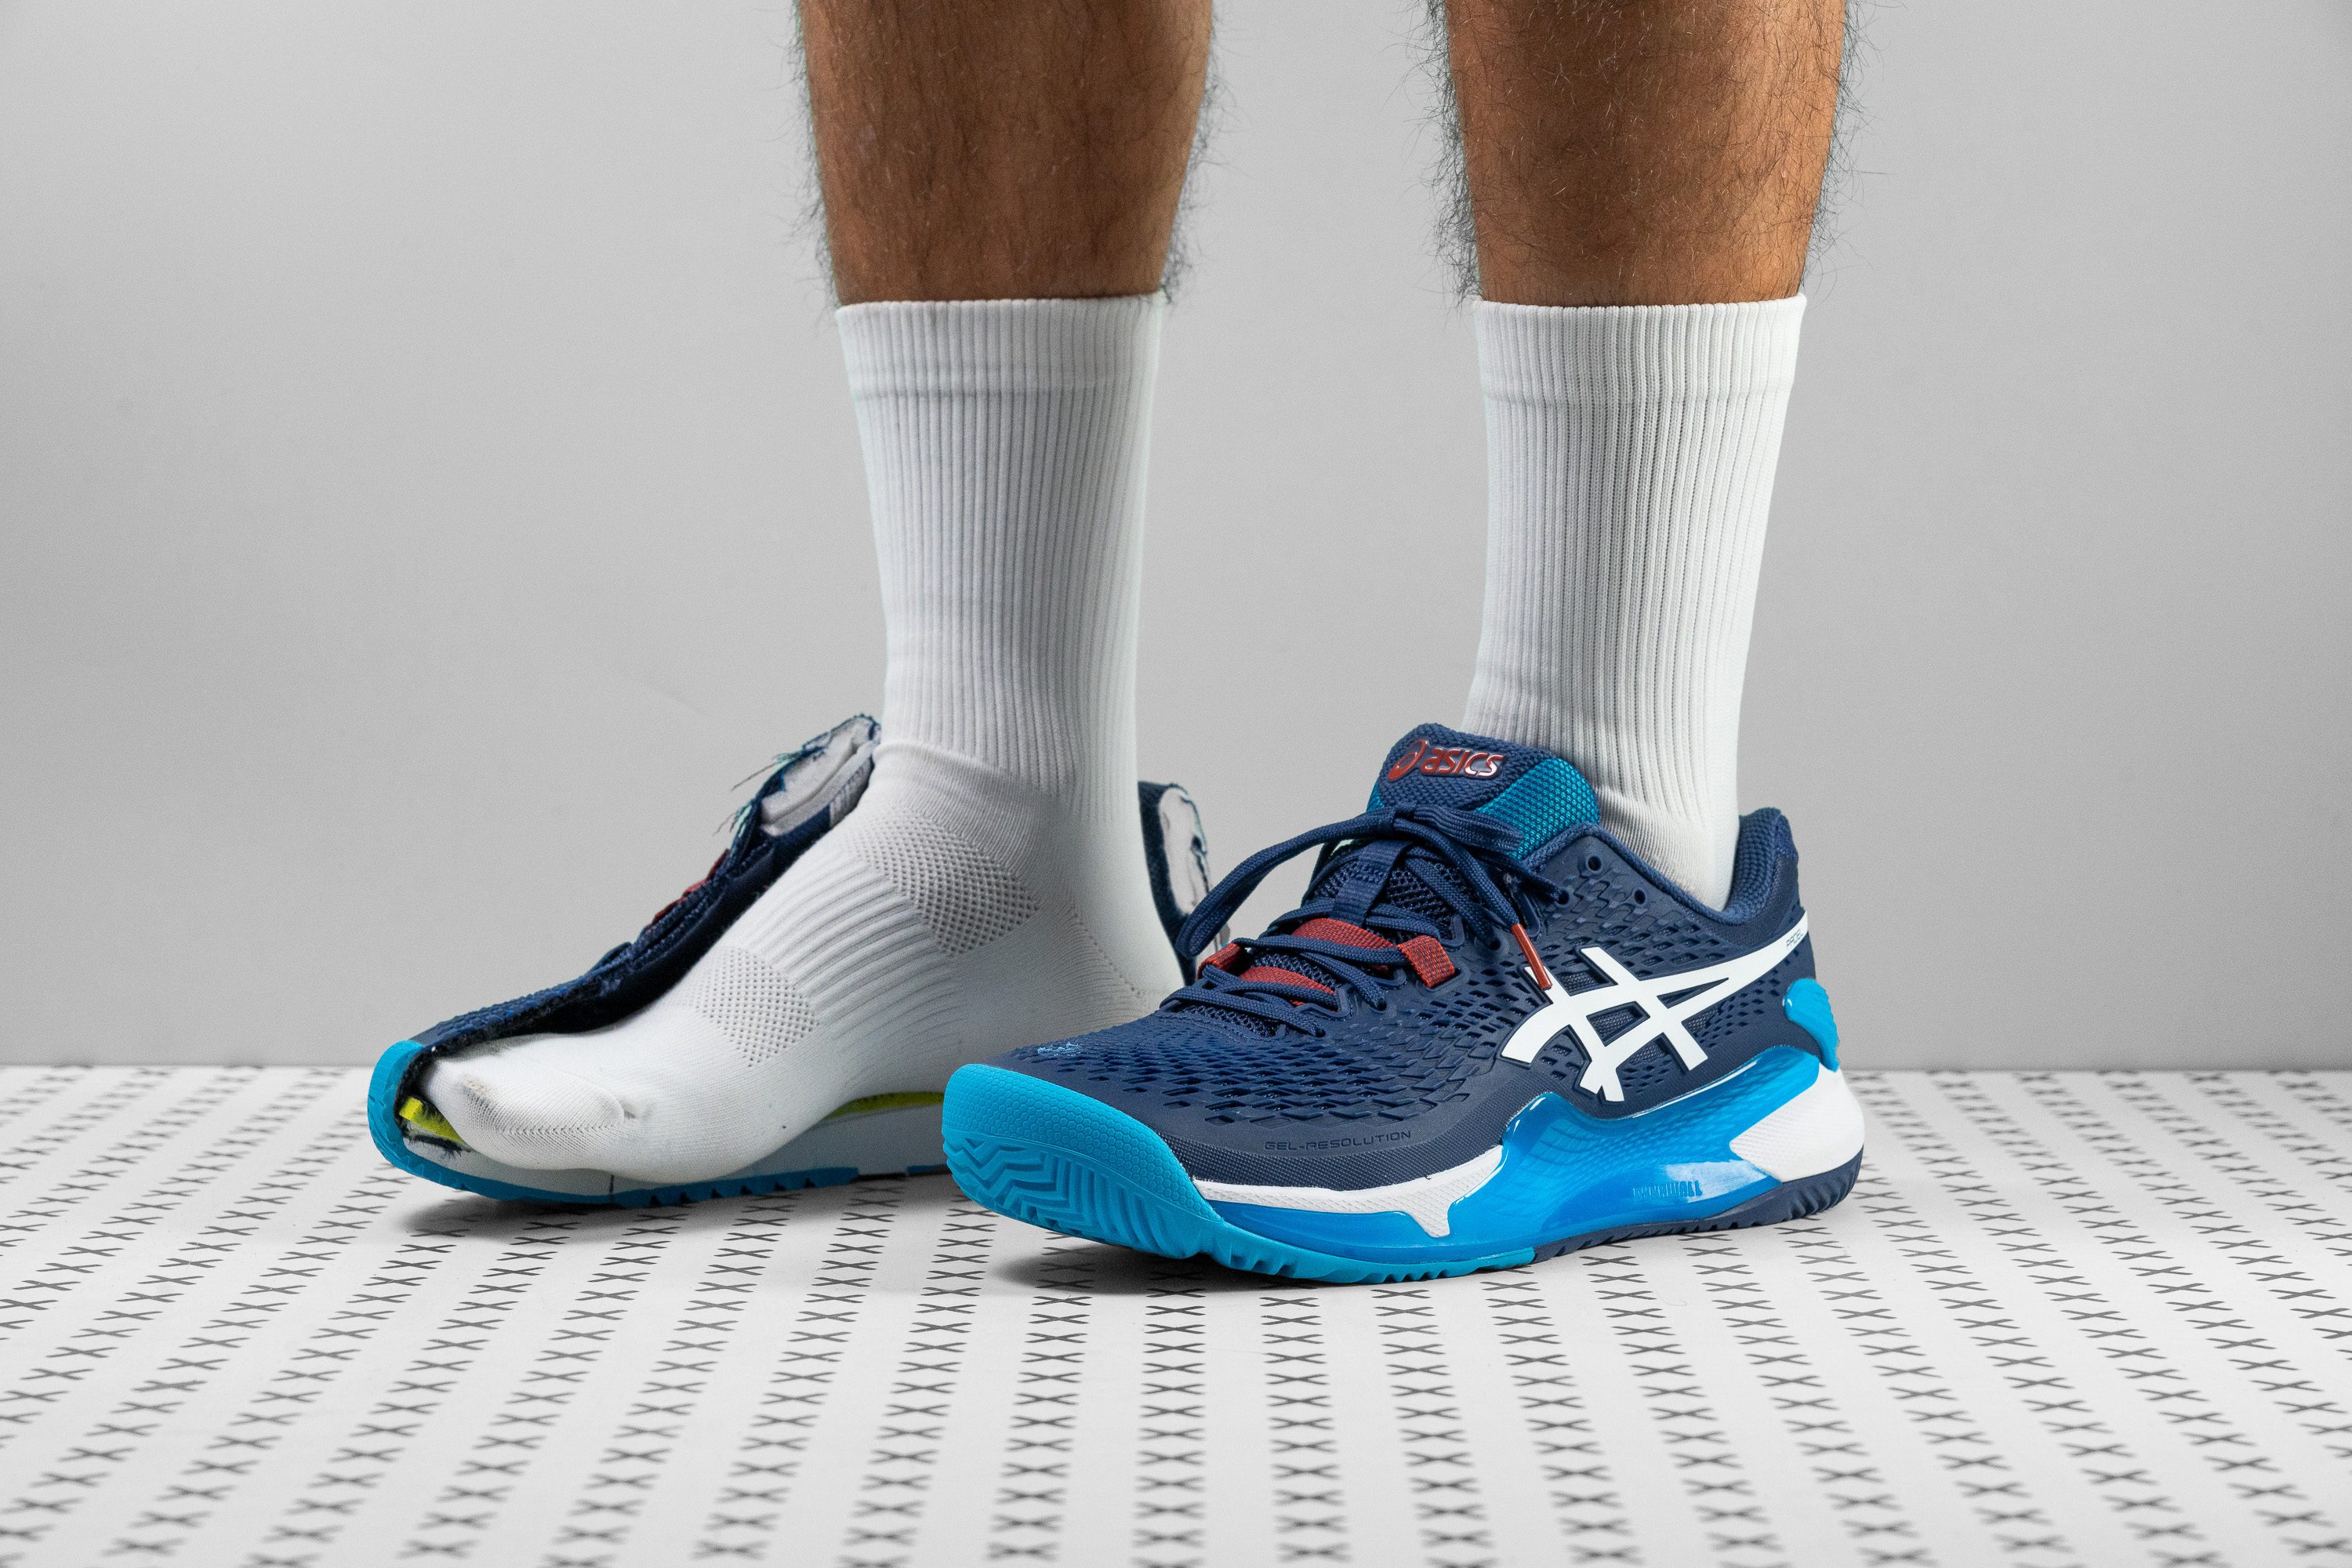 Asics Gel Resolution 9 Review - Perfect Tennis